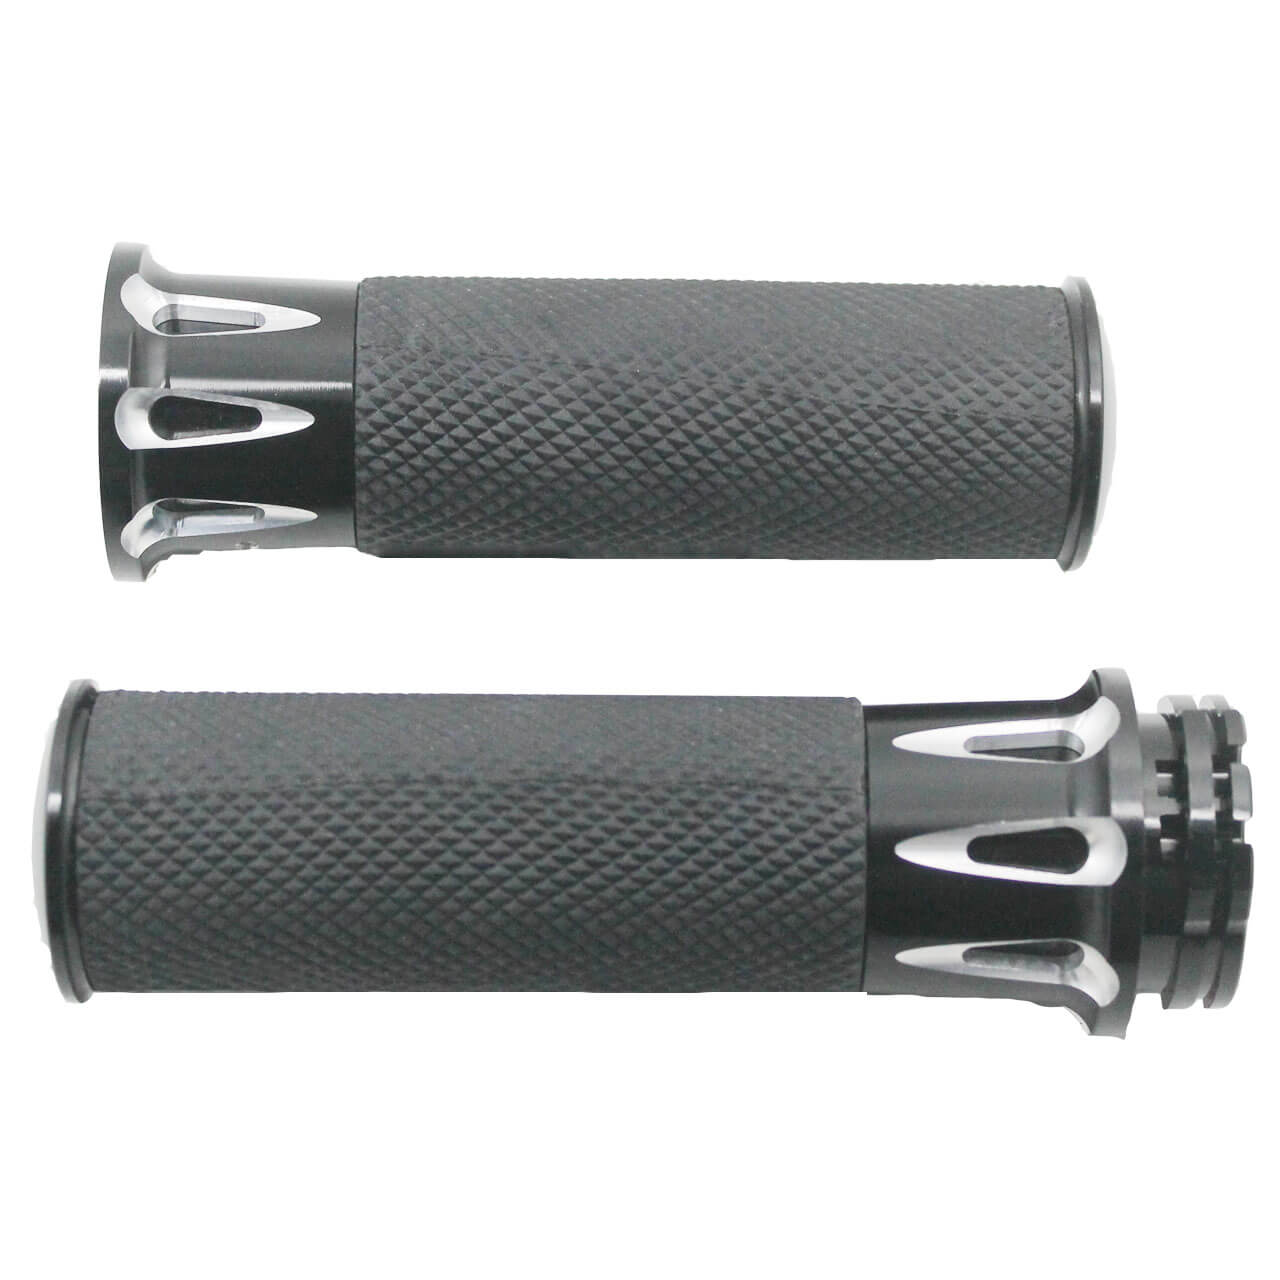 GP000701-black-rubber-hand-grips-for-harley